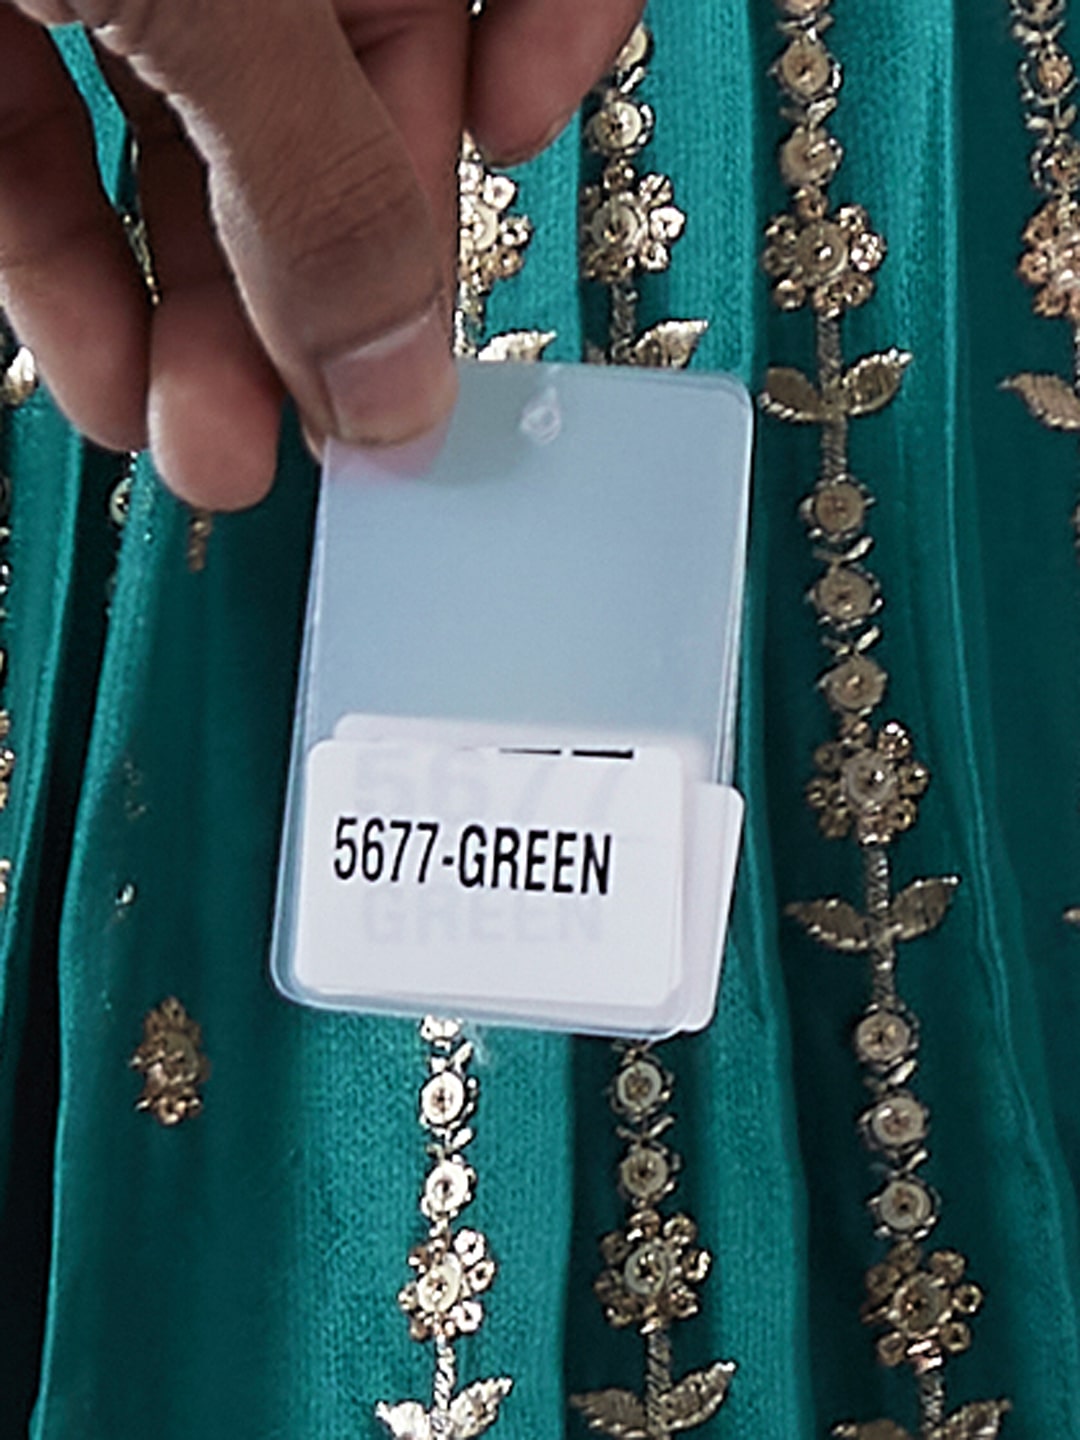 Green Pure Georgette Sequins Embroidered Semi Stitched Lehenga